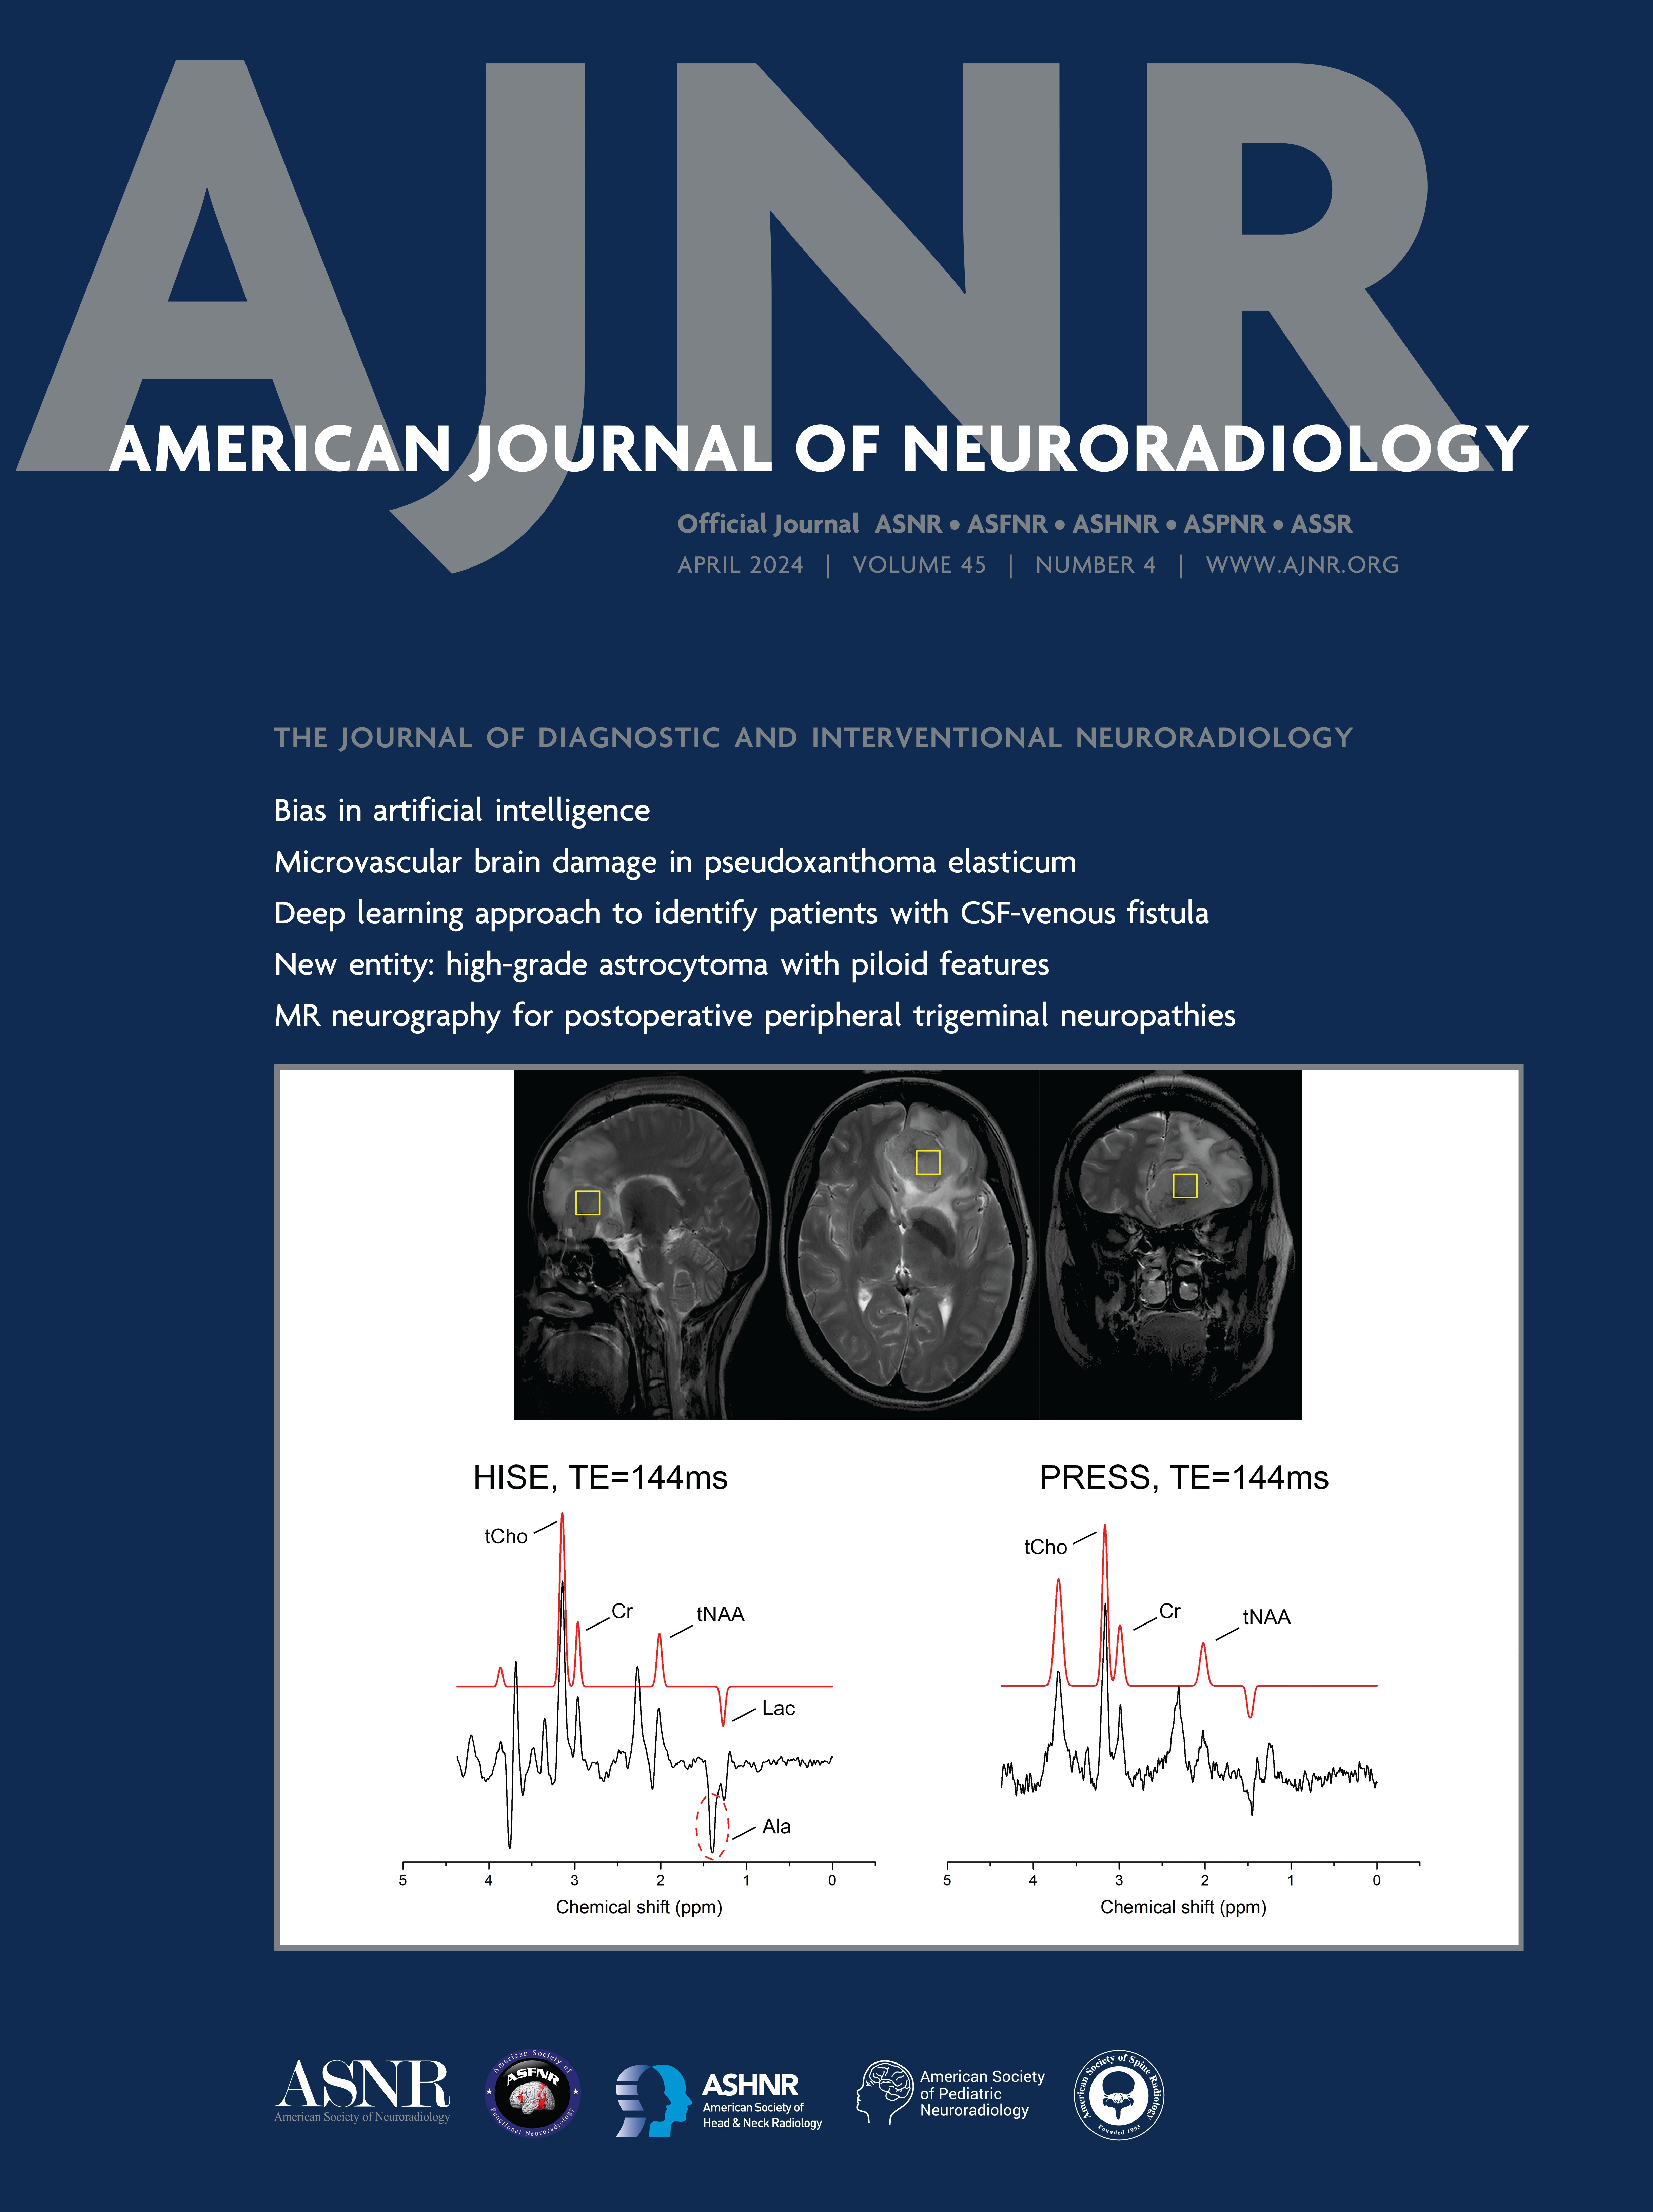 High-Grade Astrocytoma with Piloid Features: A Dual Institutional Review of Imaging Findings of a Novel Entity [BRAIN TUMOR IMAGING]